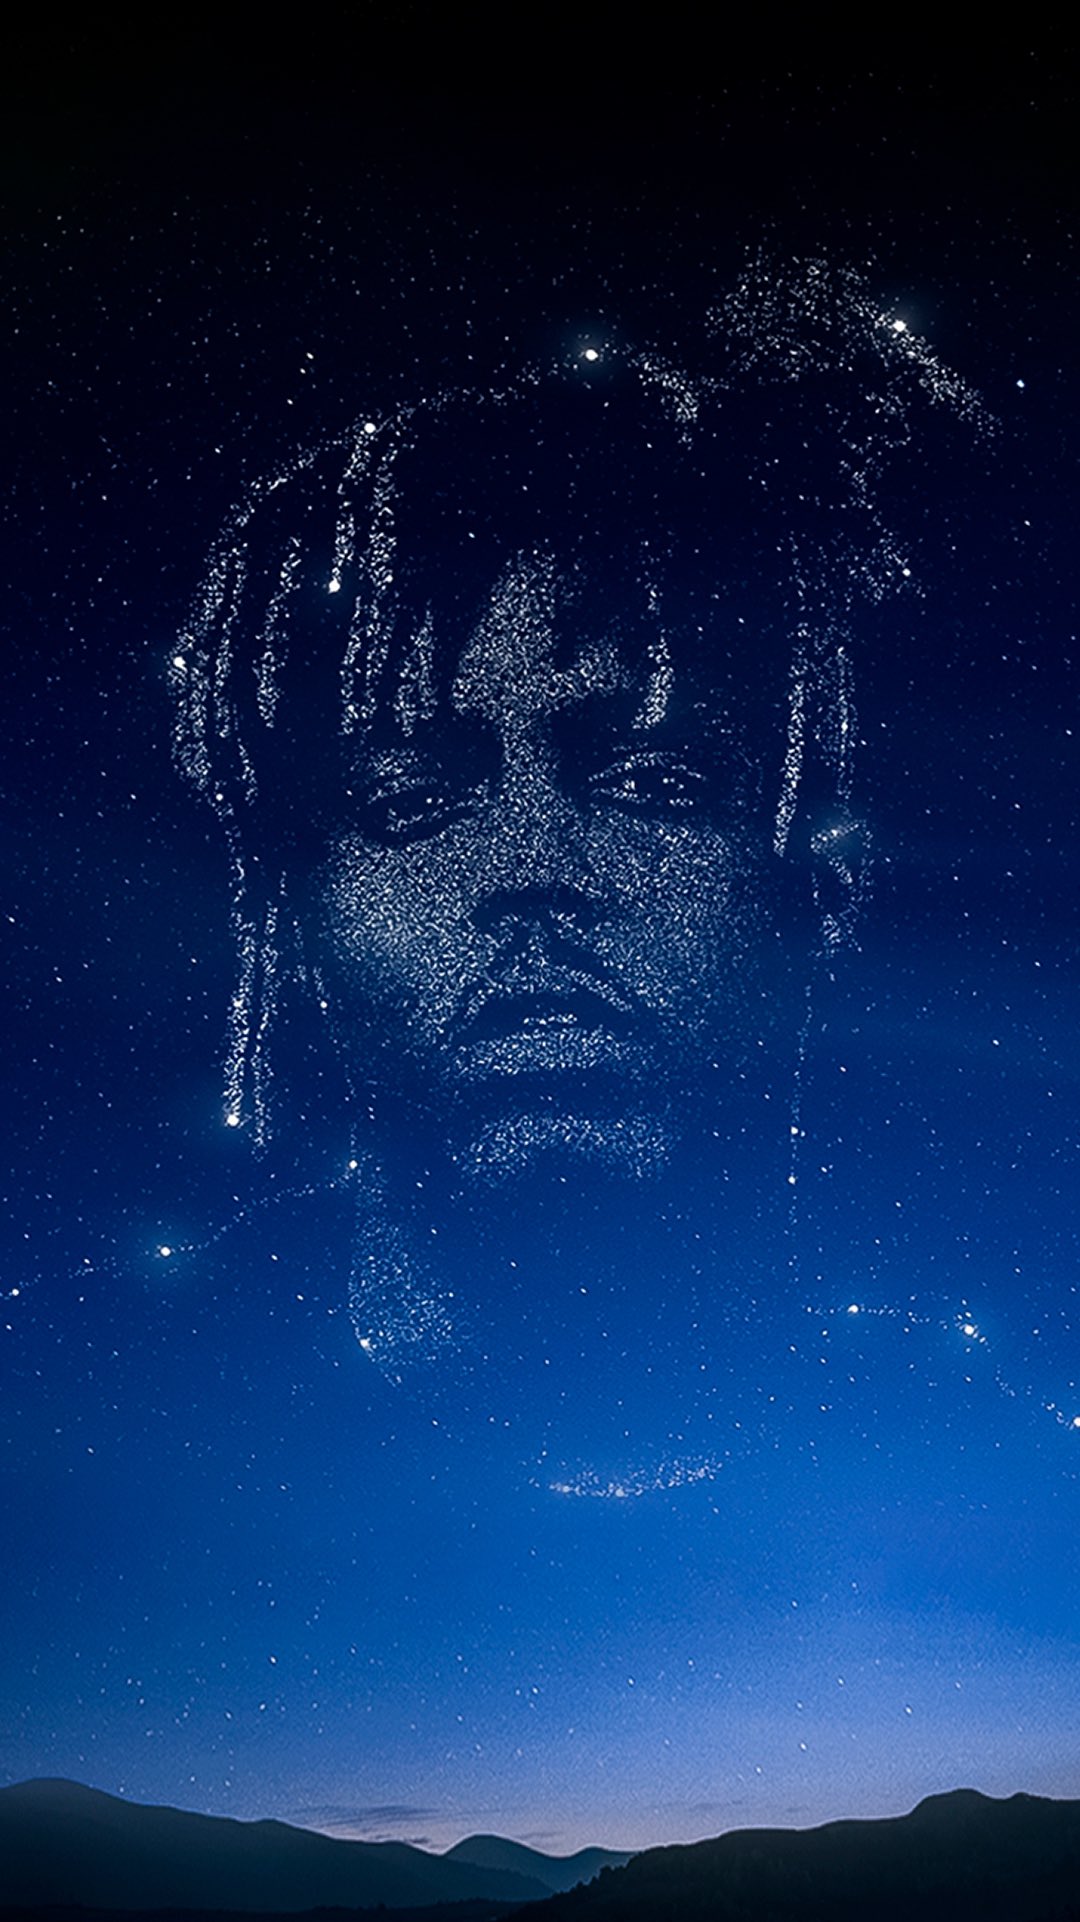 outlyning of my recent juice wrld art